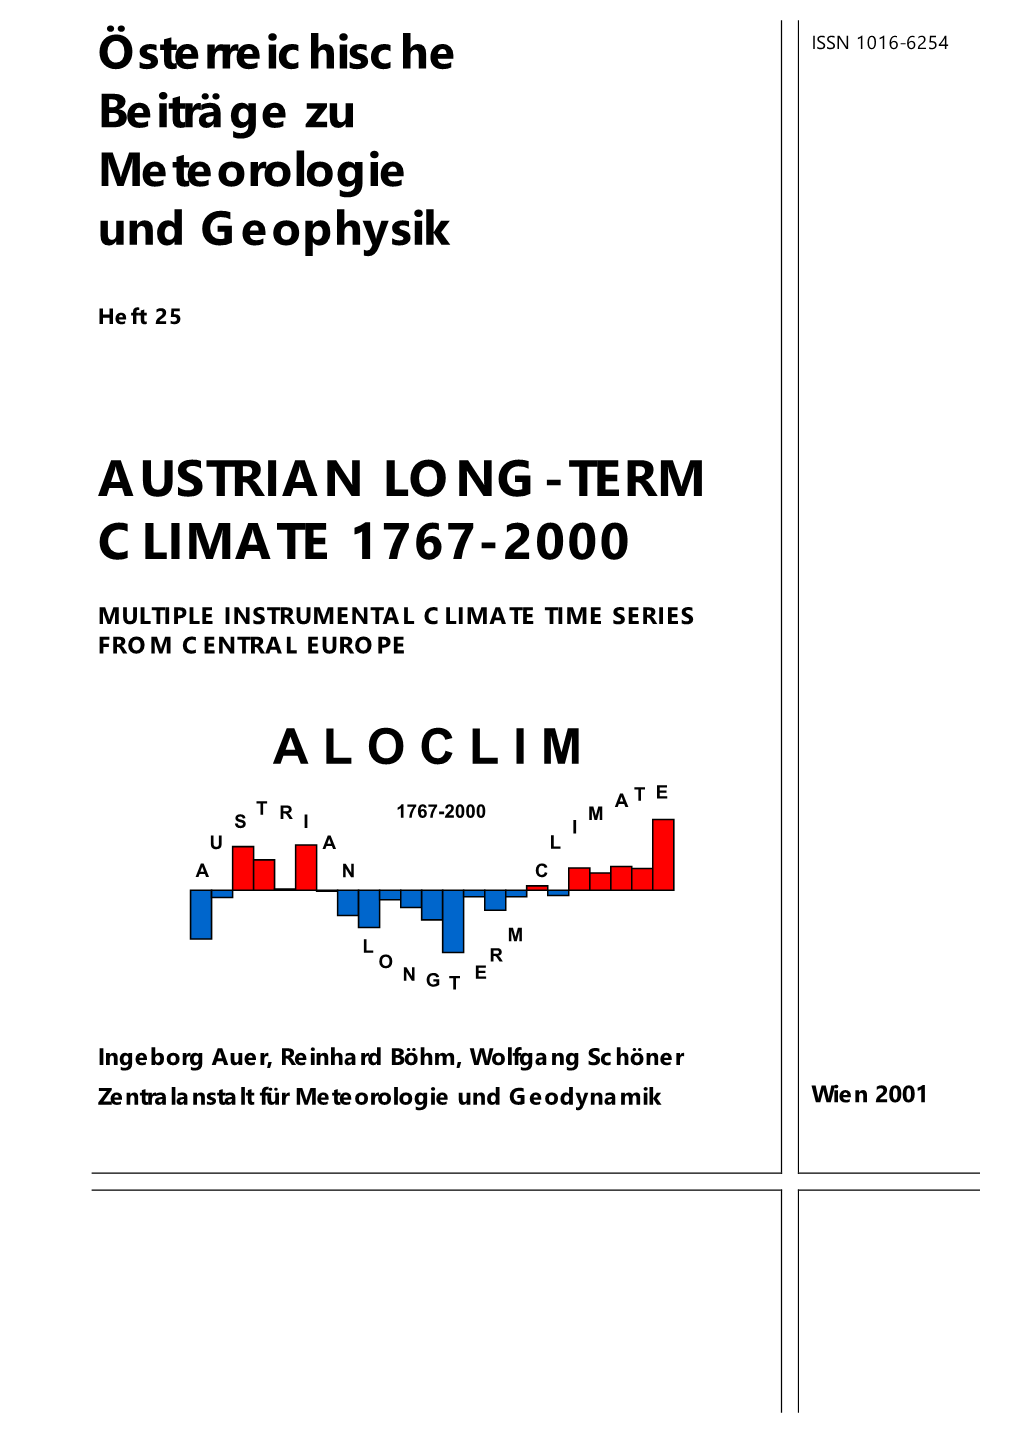 Austrian Long-Term Climate 1767-2000 Multiple Instrumental Climate Time Series from Central Europe